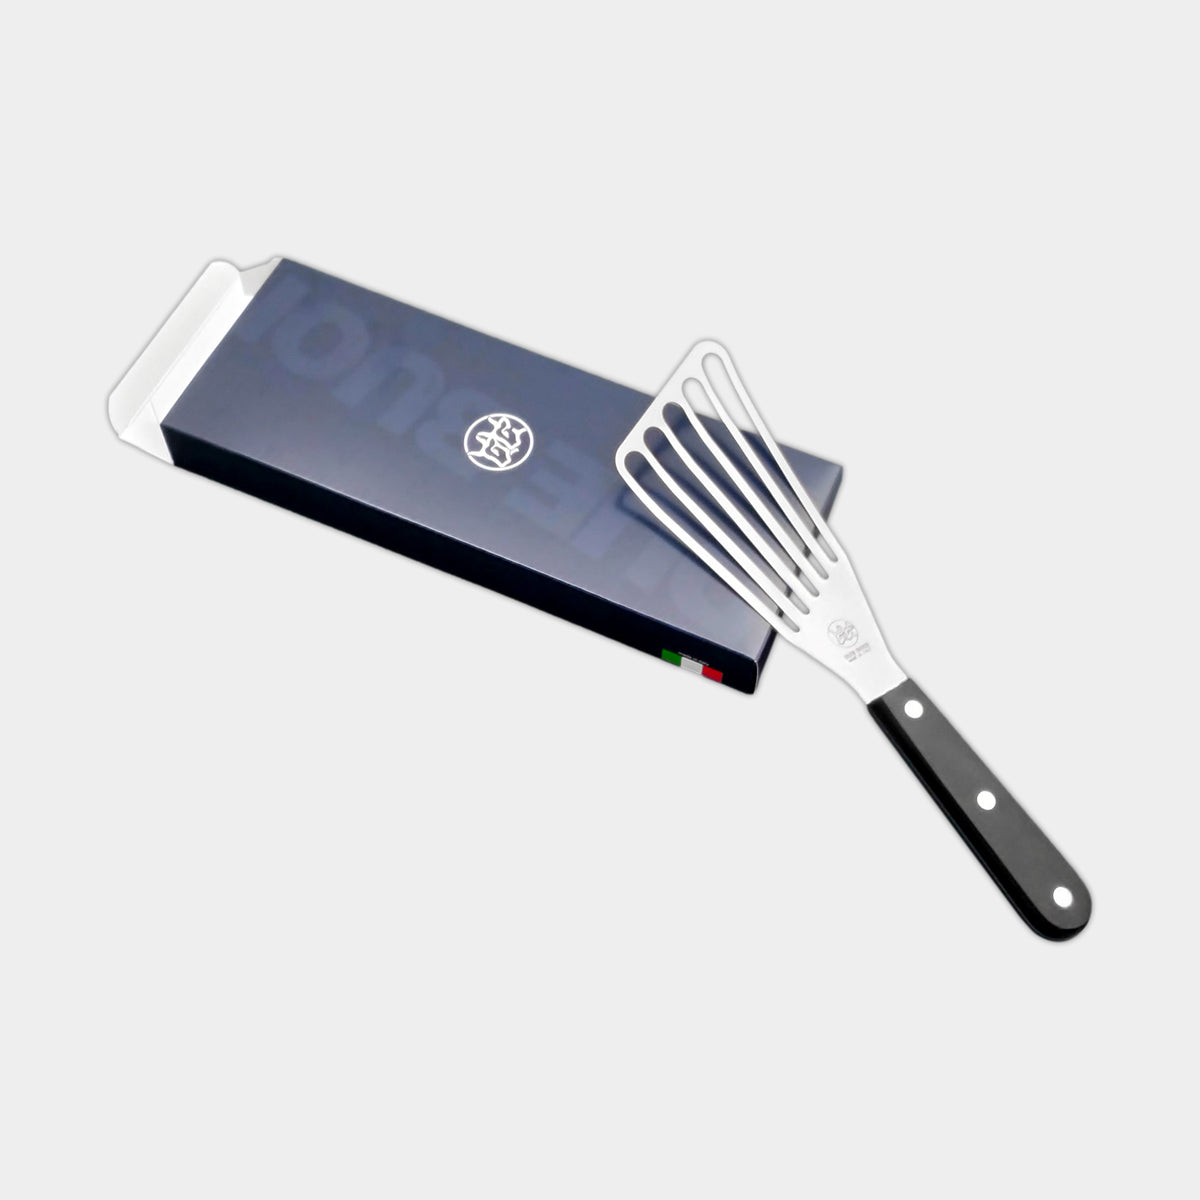 Zulay 12.4” Stainless Steel Fish Spatula - Sturdy Slotted Fish Turner  Spatula with Sloped Head Desig…See more Zulay 12.4” Stainless Steel Fish  Spatula